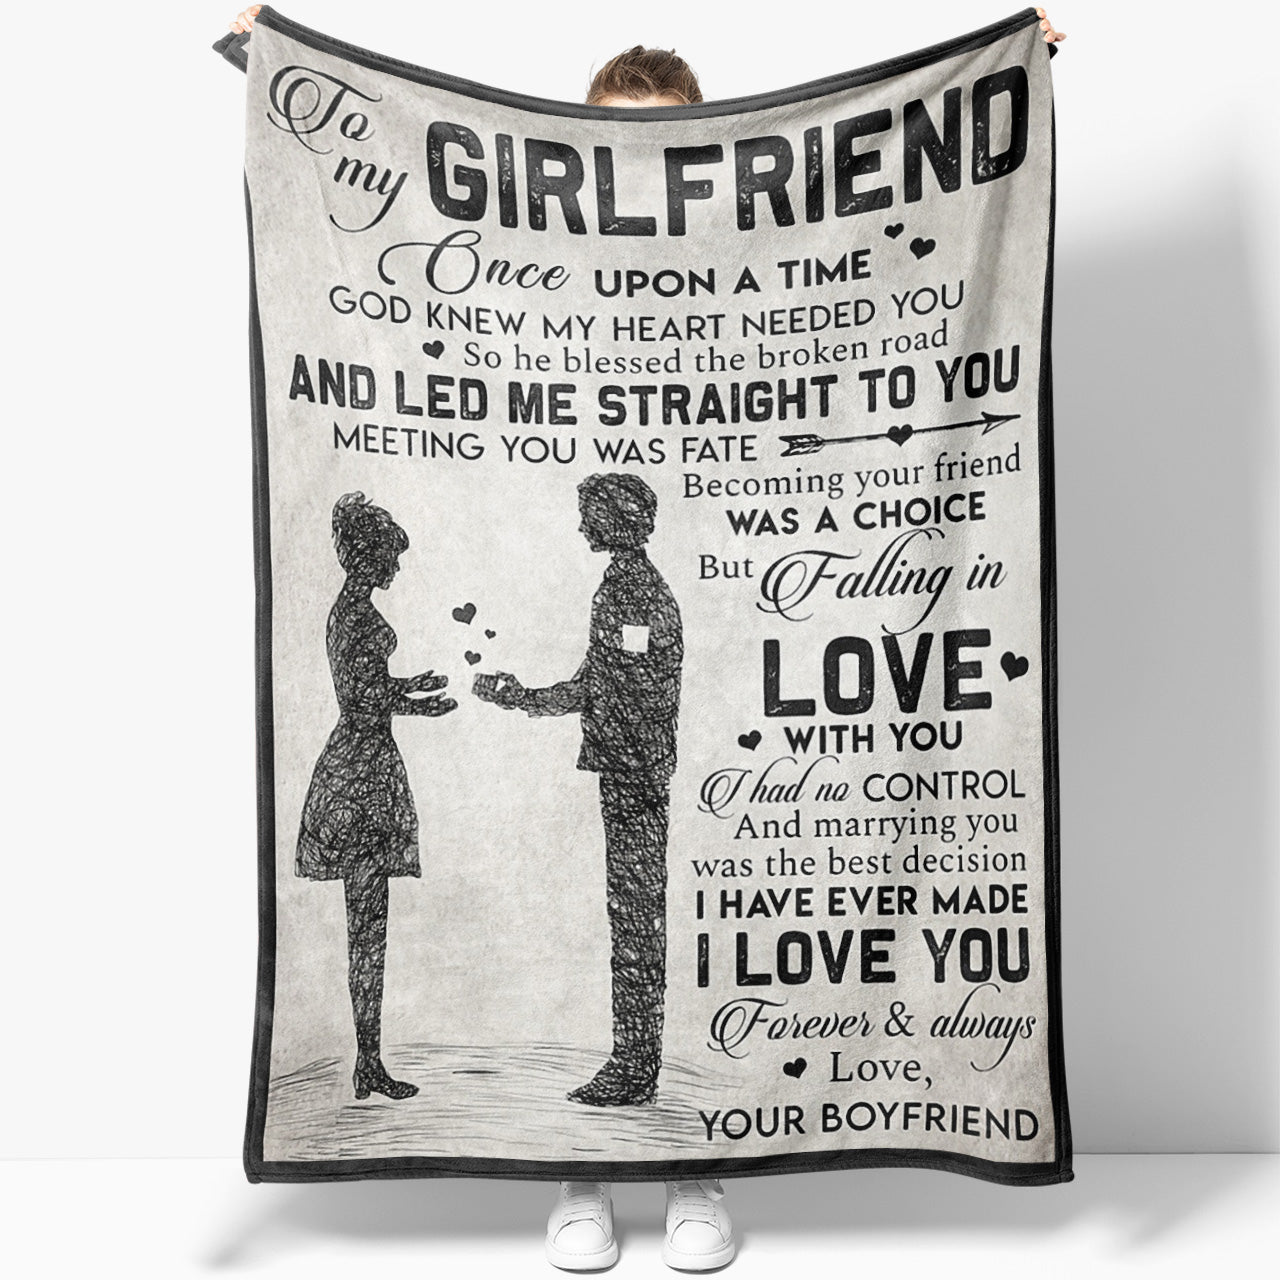 Personalized Blanket Gift For Her, Gift For Girlfriend, Valentines Day Gifts For Her, Once Upon A Time